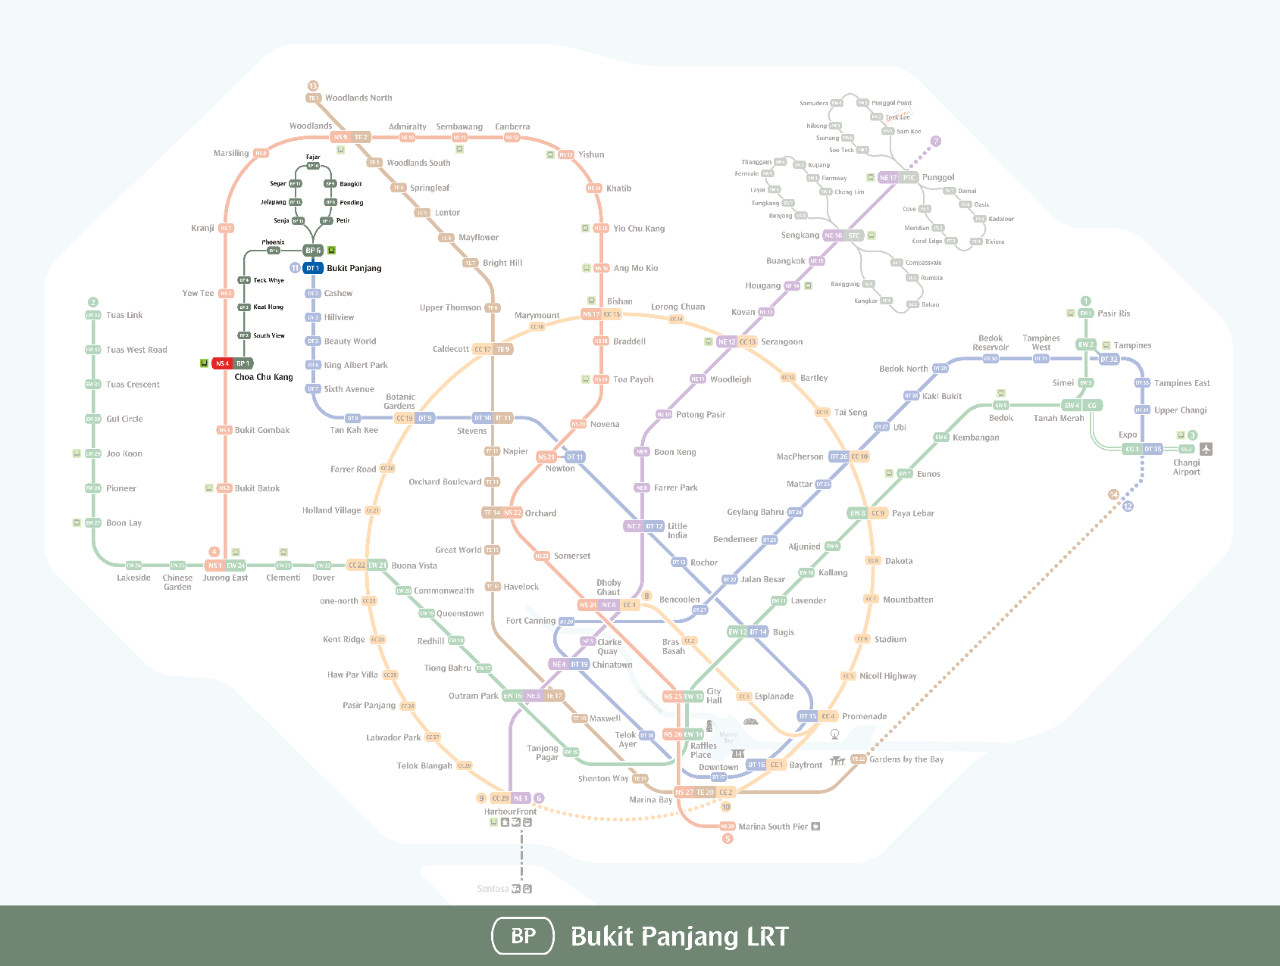 This is the system map for BPLRT